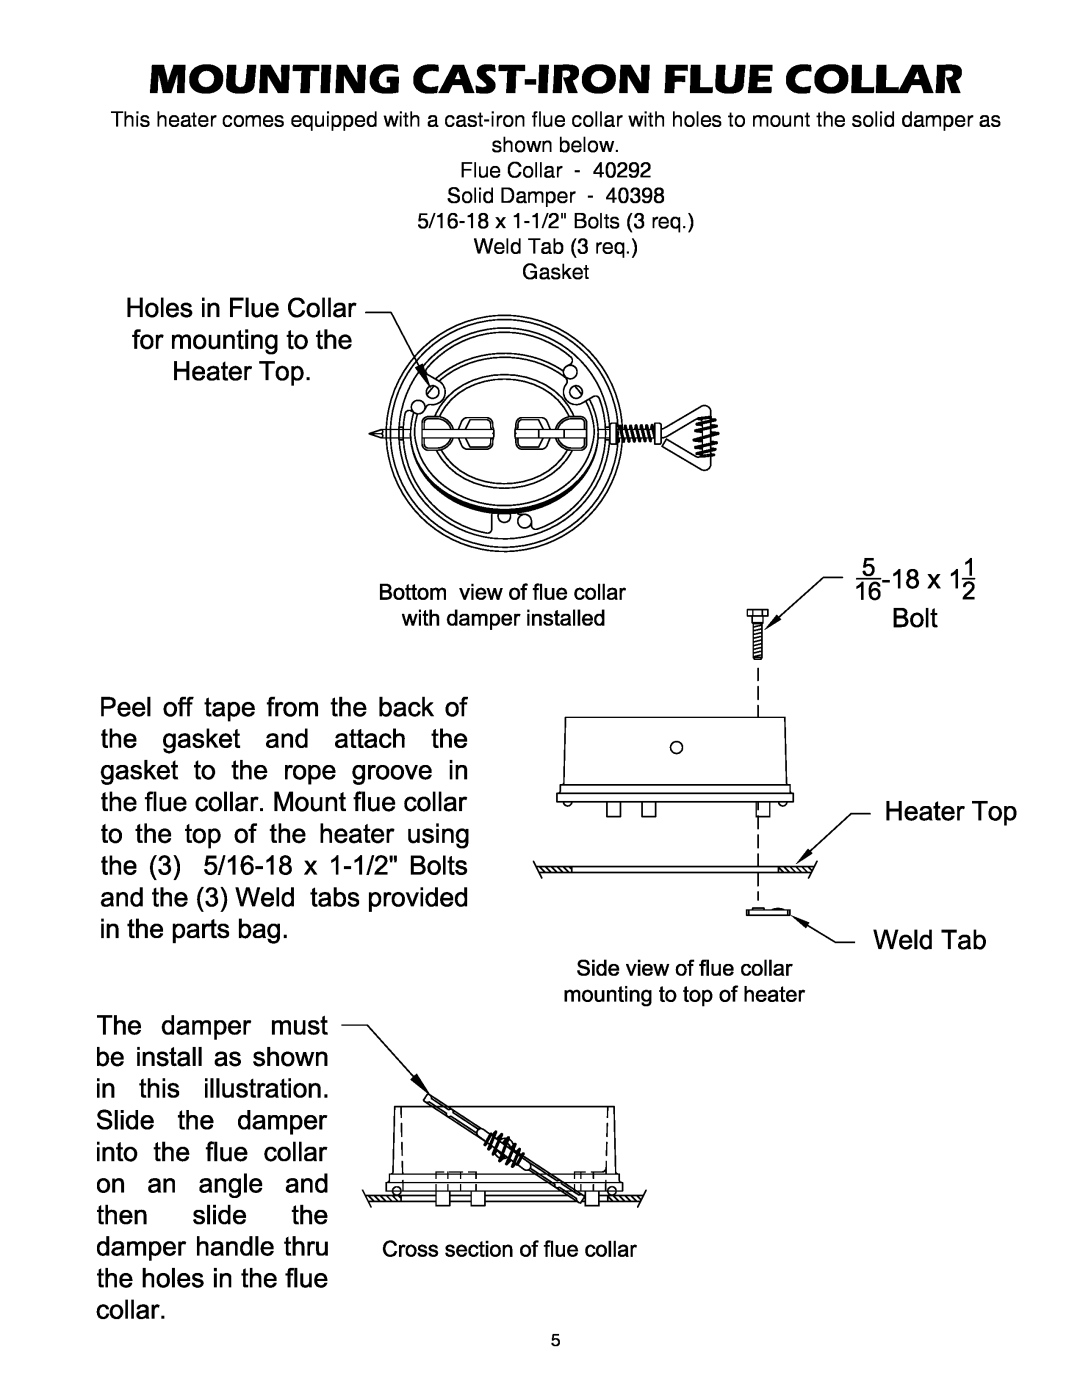 United States Stove 2007B owner manual Mounting Cast-Ironflue Collar, shown below Flue Collar - Solid Damper 